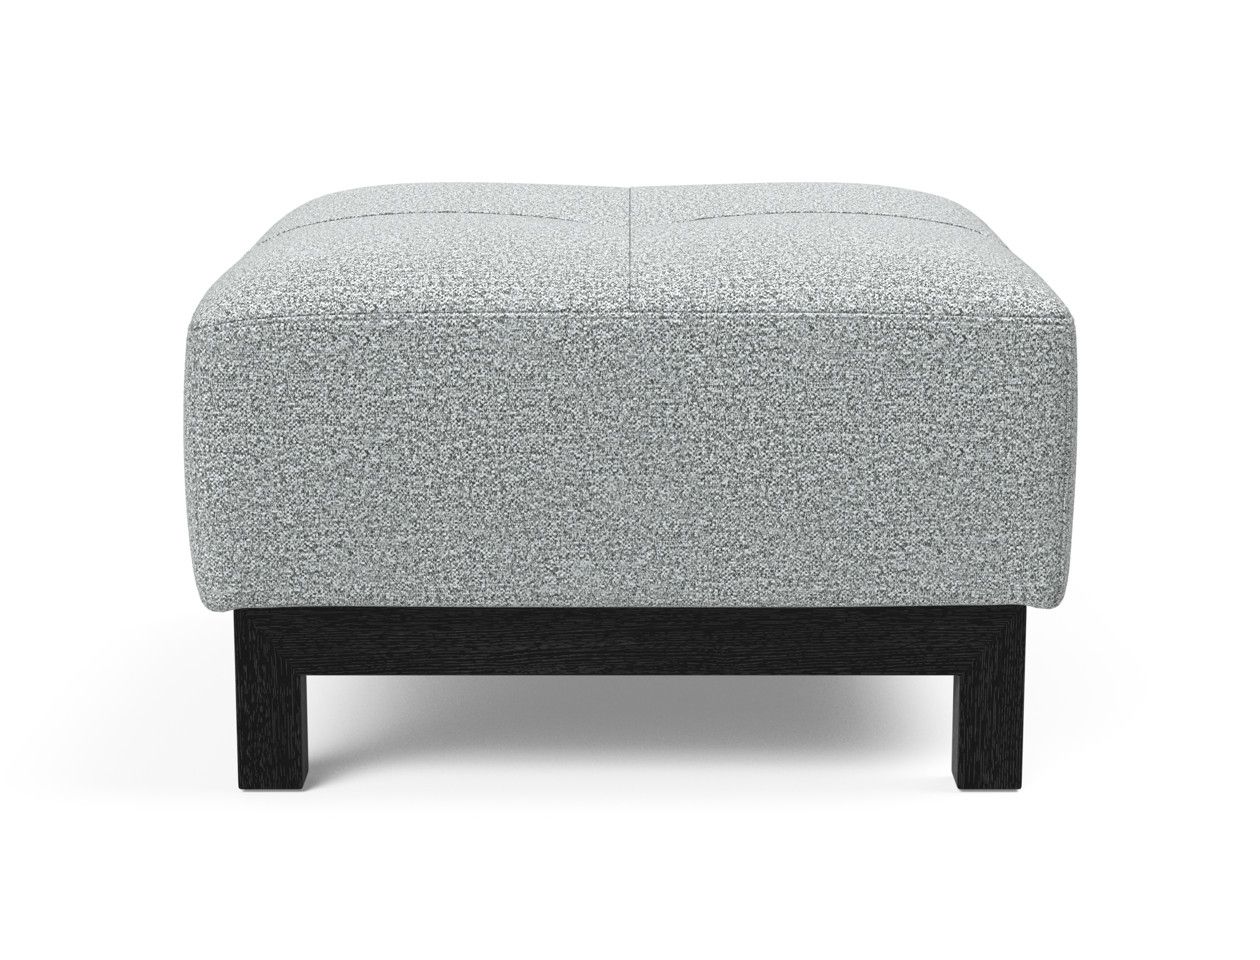 Deluxe Excess Ottoman Melange Light Gray, Black Wood Legsinnovation Regarding Light Blue And Gray Solid Cube Pouf Ottomans (View 9 of 20)